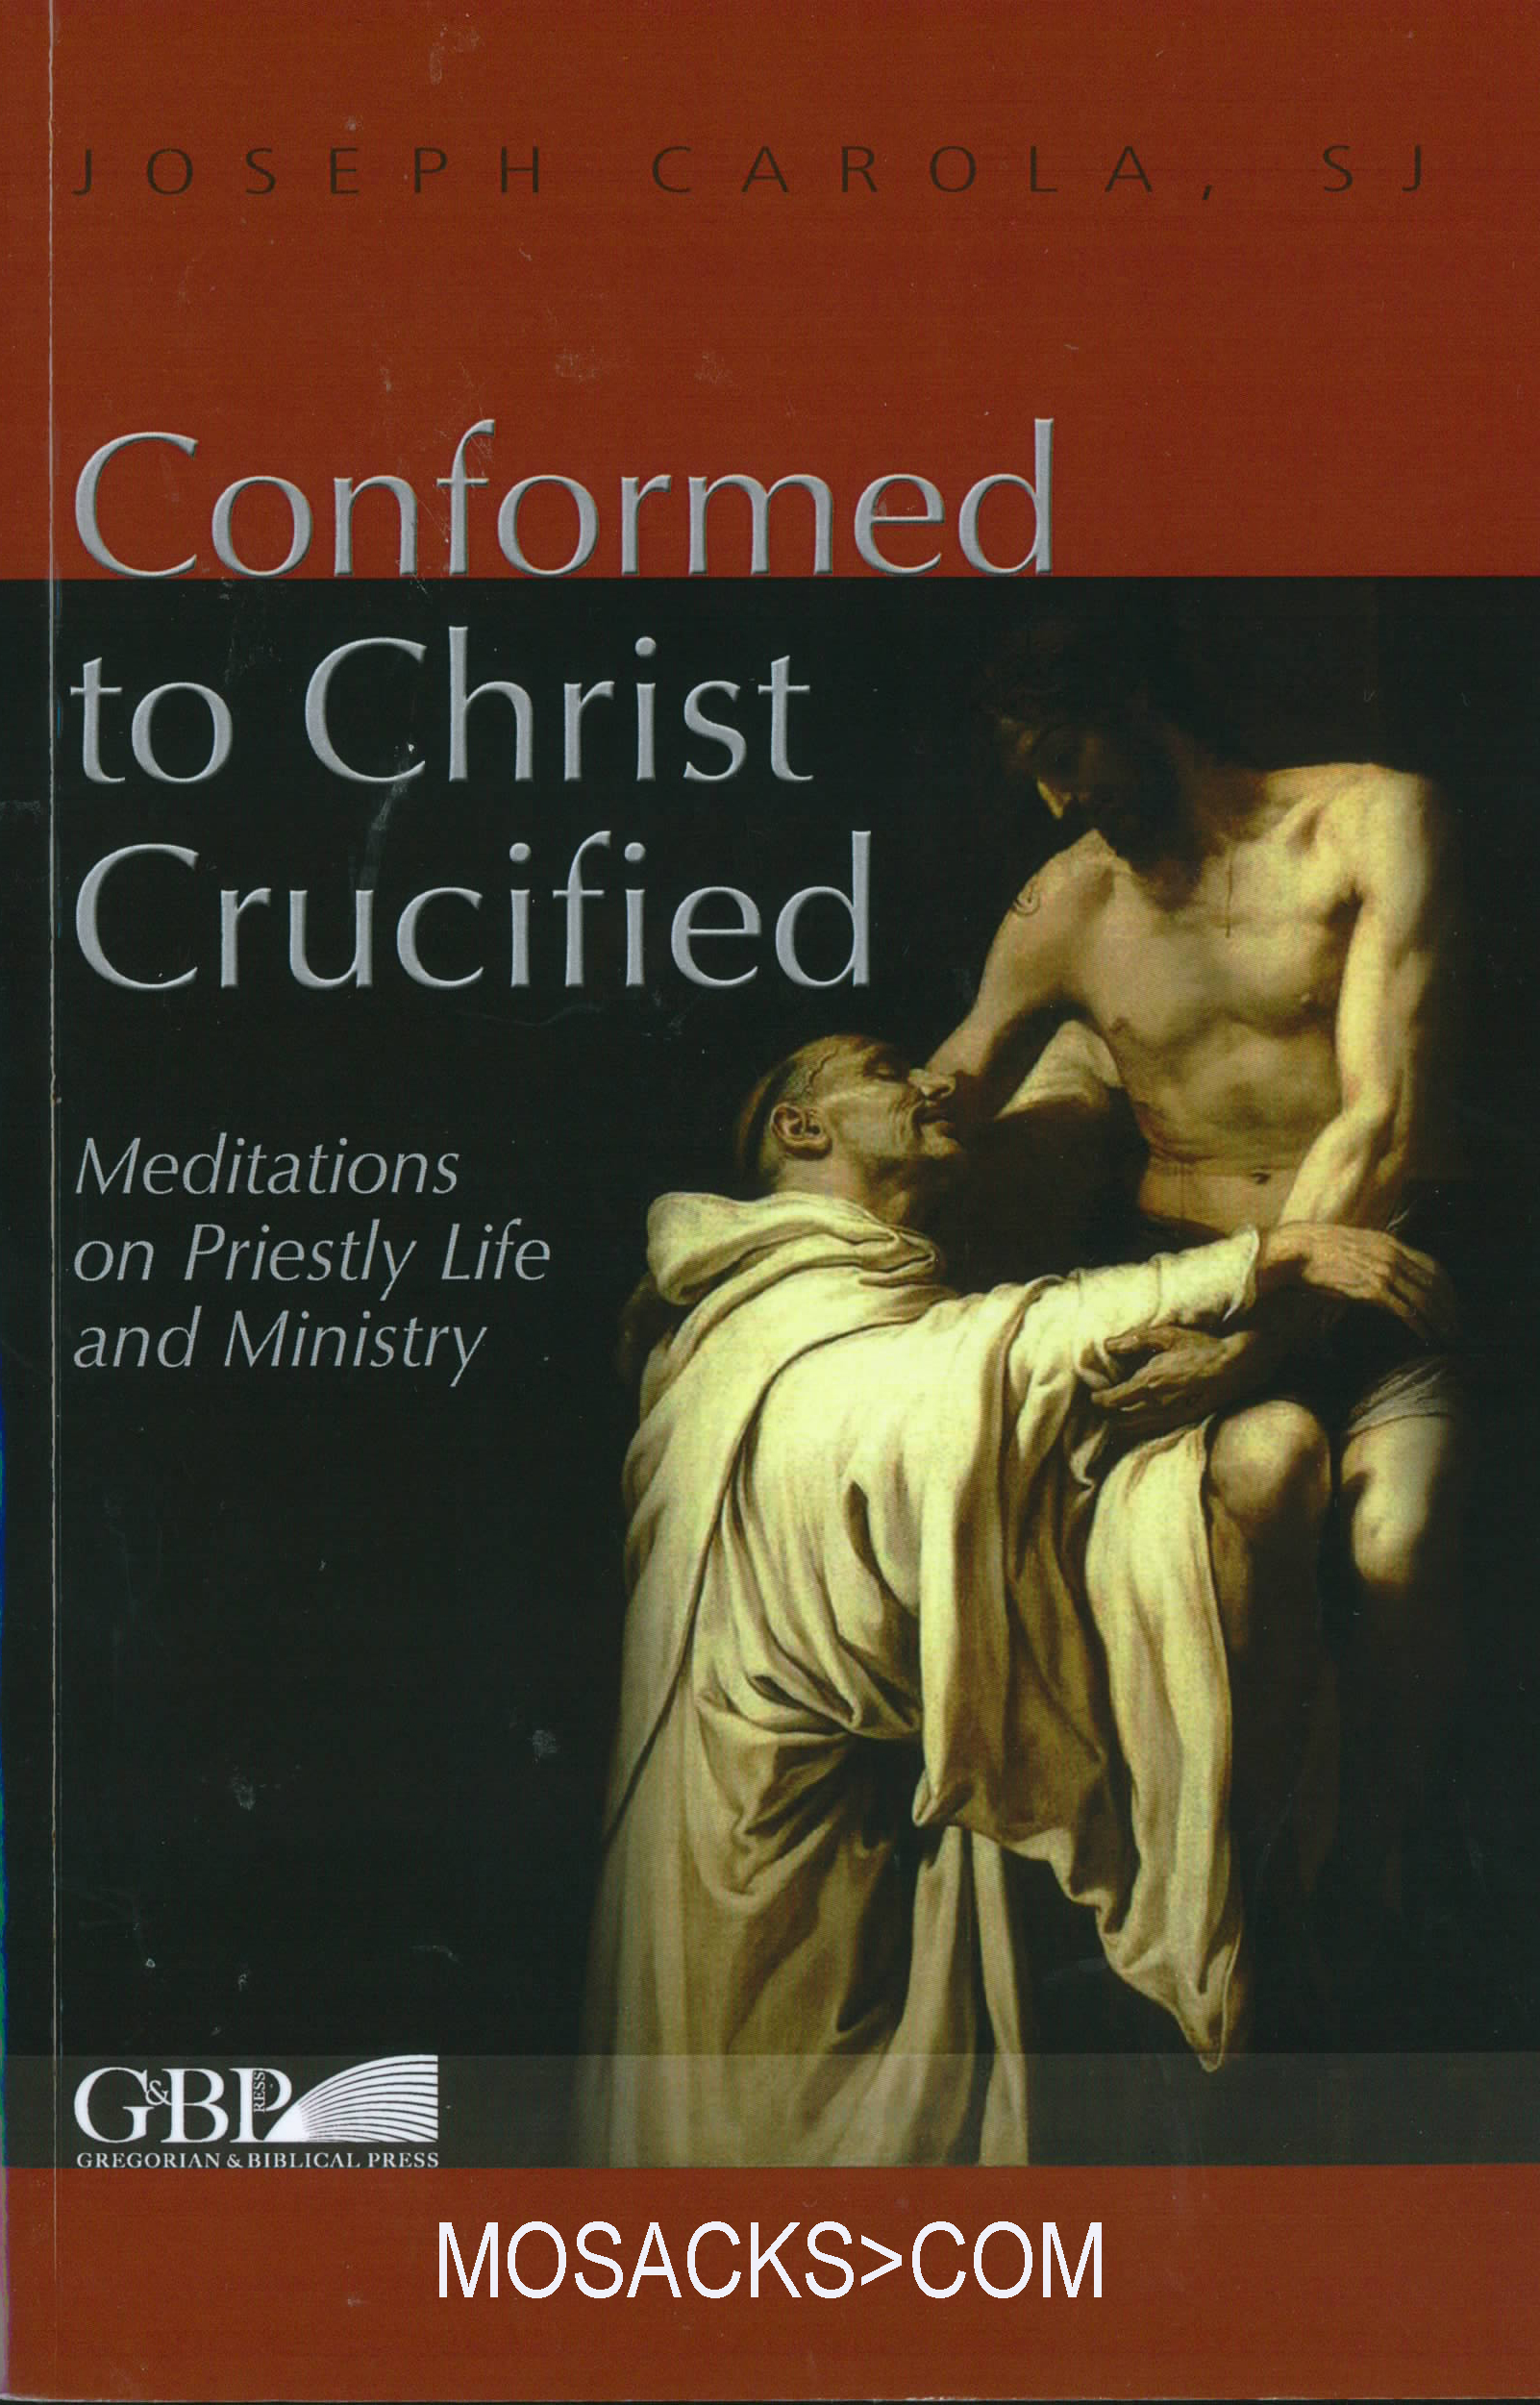 Conformed to Christ Crucified by Joseph Carola, S.J. 445-91529